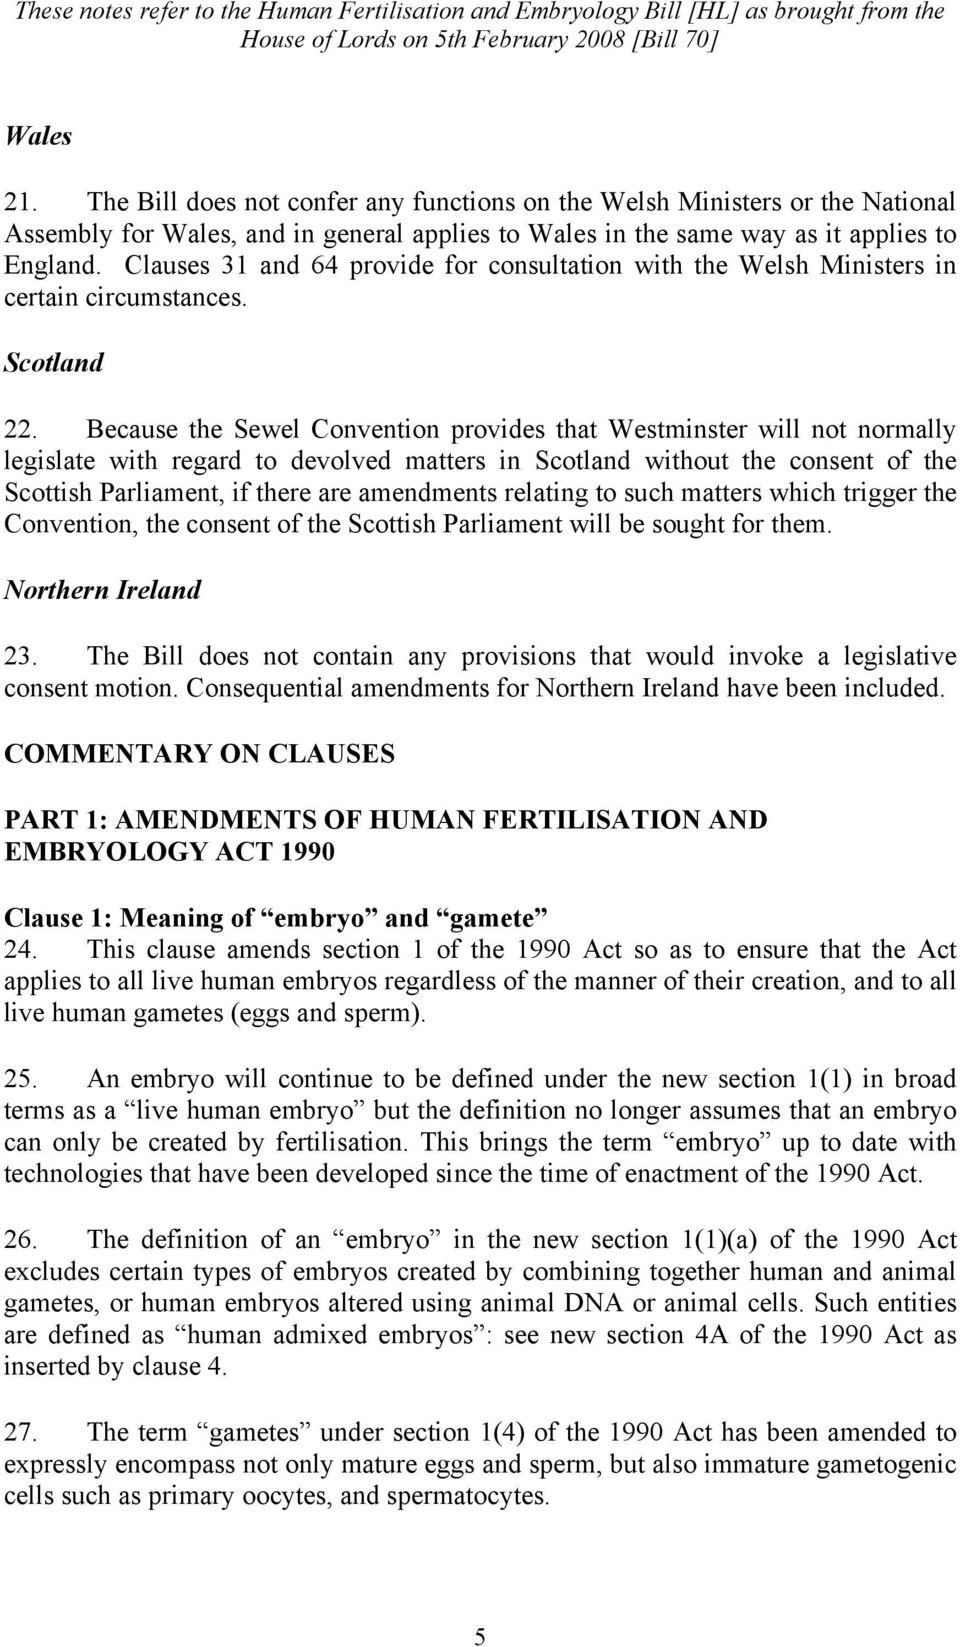 Because the Sewel Convention provides that Westminster will not normally legislate with regard to devolved matters in Scotland without the consent of the Scottish Parliament, if there are amendments